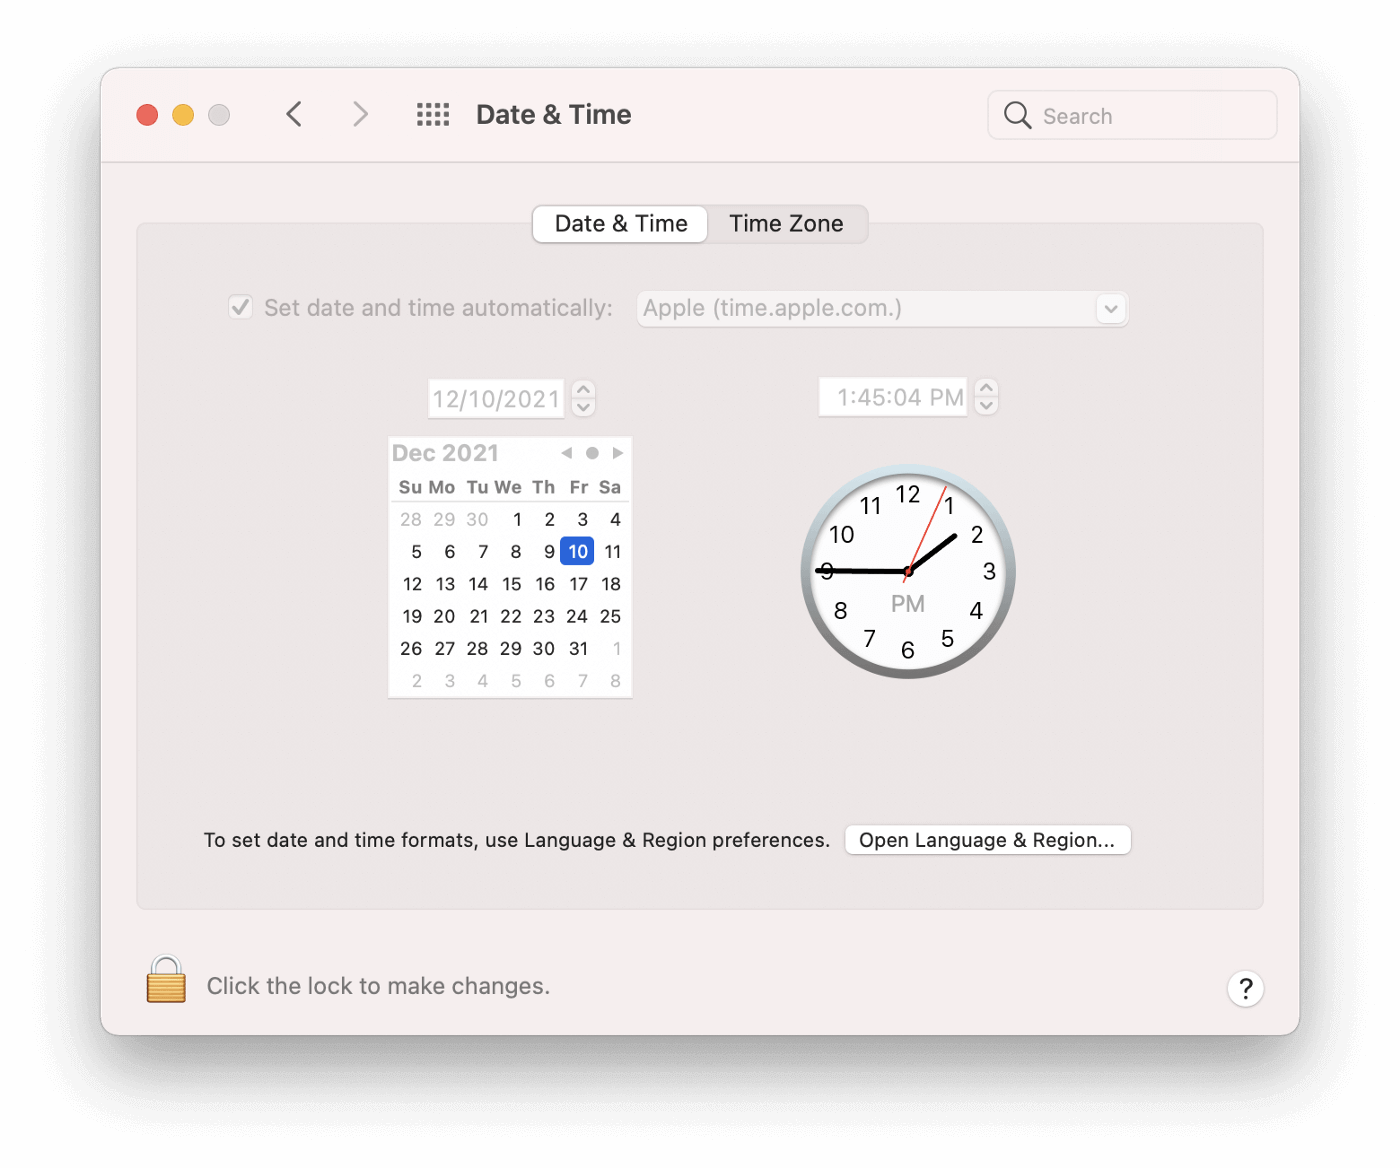 The macOS preferences panel showing the Date & Time preferences